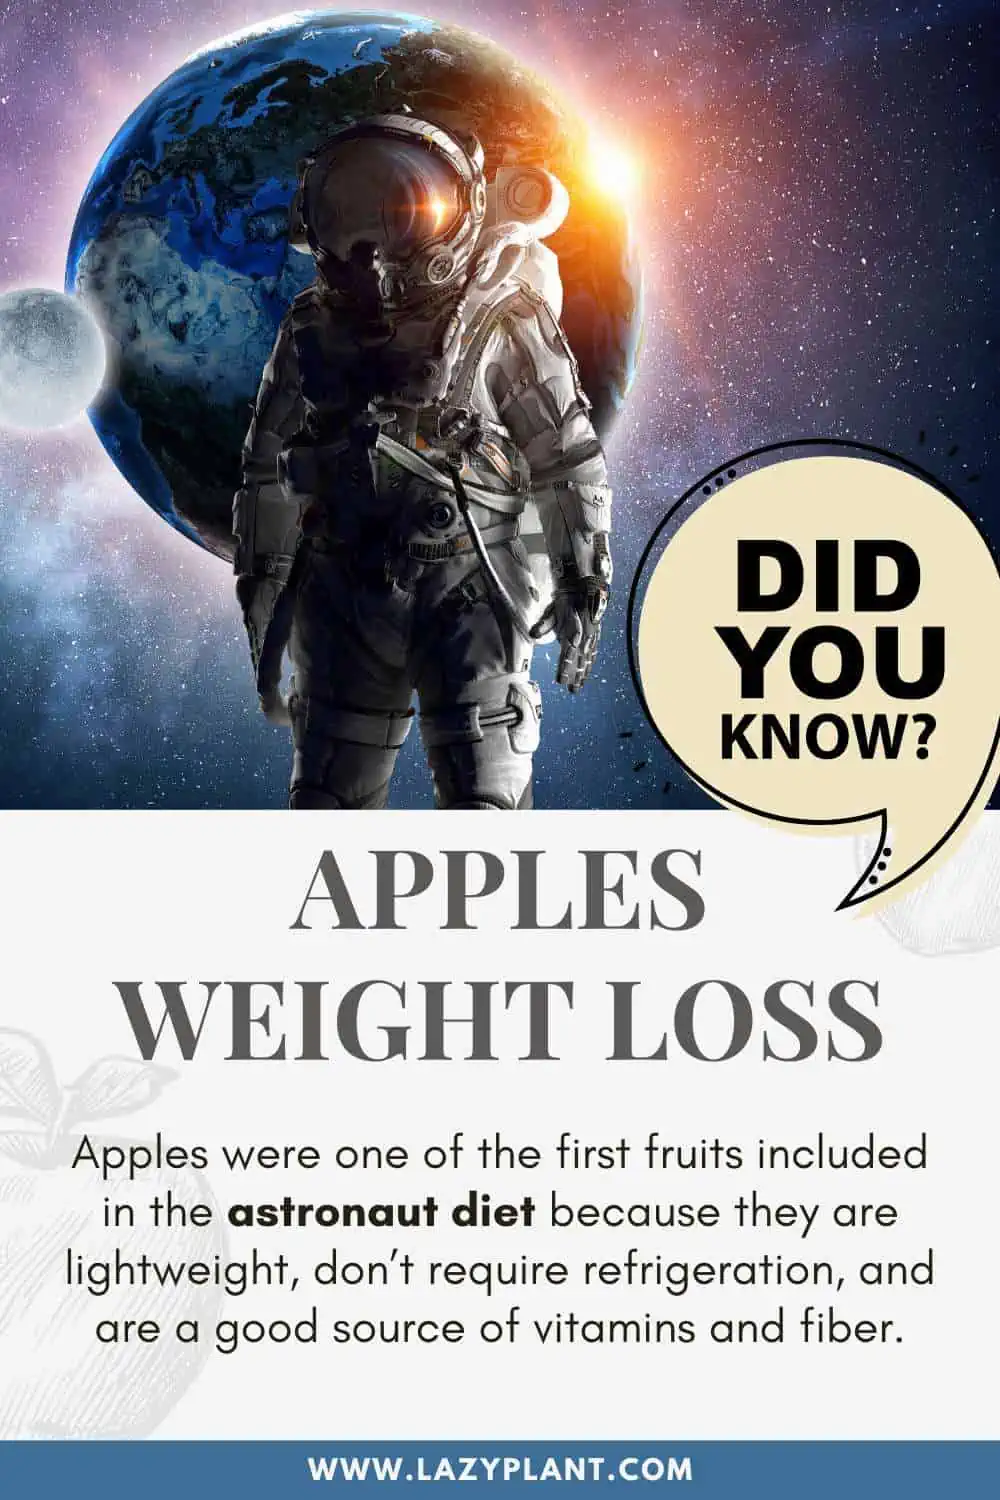 Apple | Did you know?